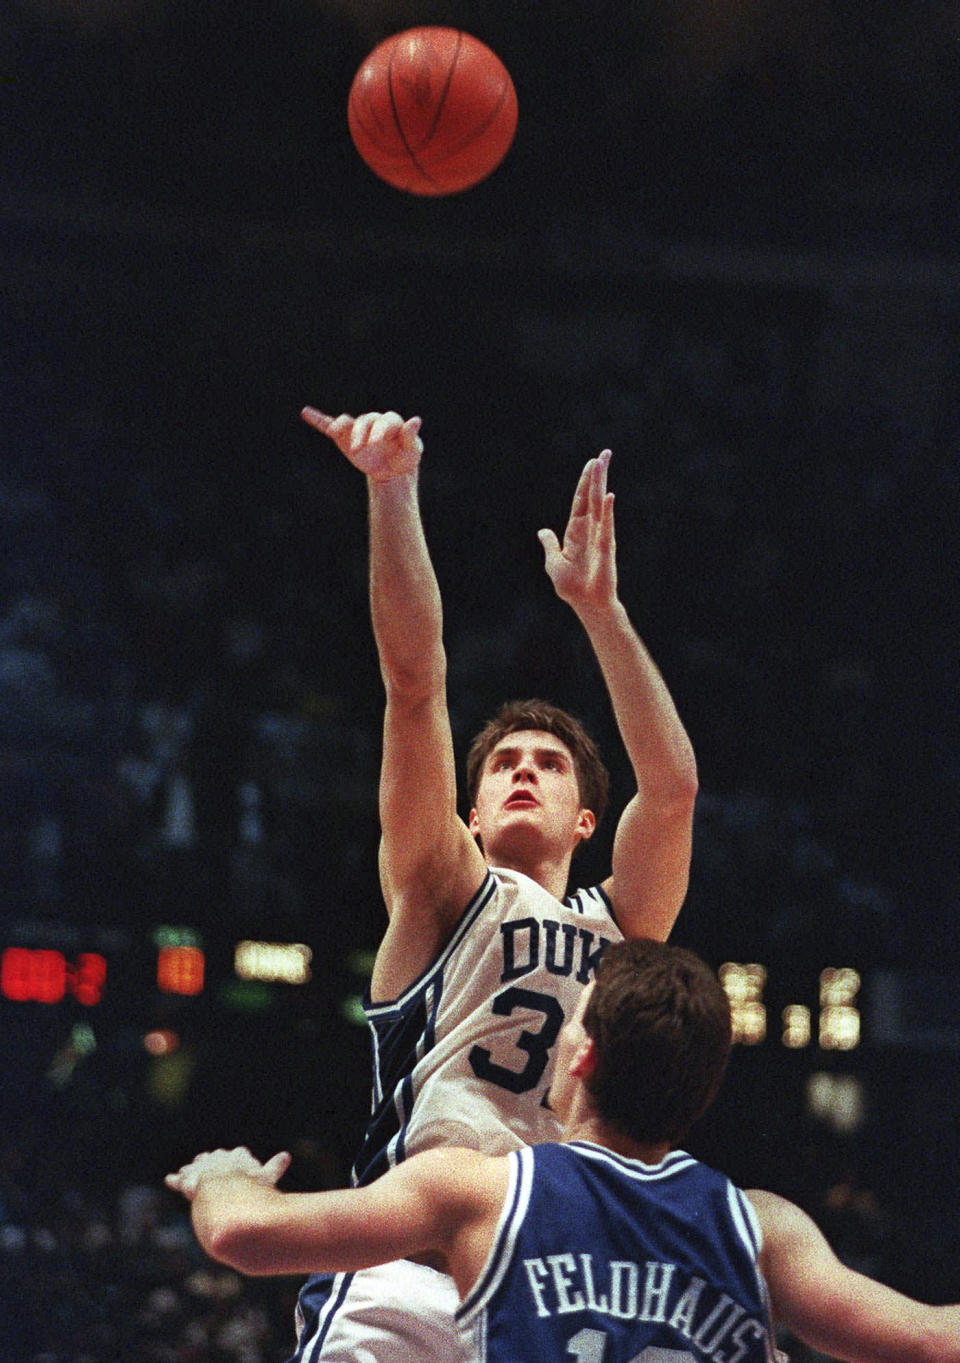 FILE - In this March 28, 1992, file photo, Duke's Christian Laettner takes the winning shot in overtime over Kentucky's Deron Feldhaus for a 104-103 victory in the East Regional Final NCAA college basketball game in Philadelphia. F (AP Photo/Charles Arbogast, File)